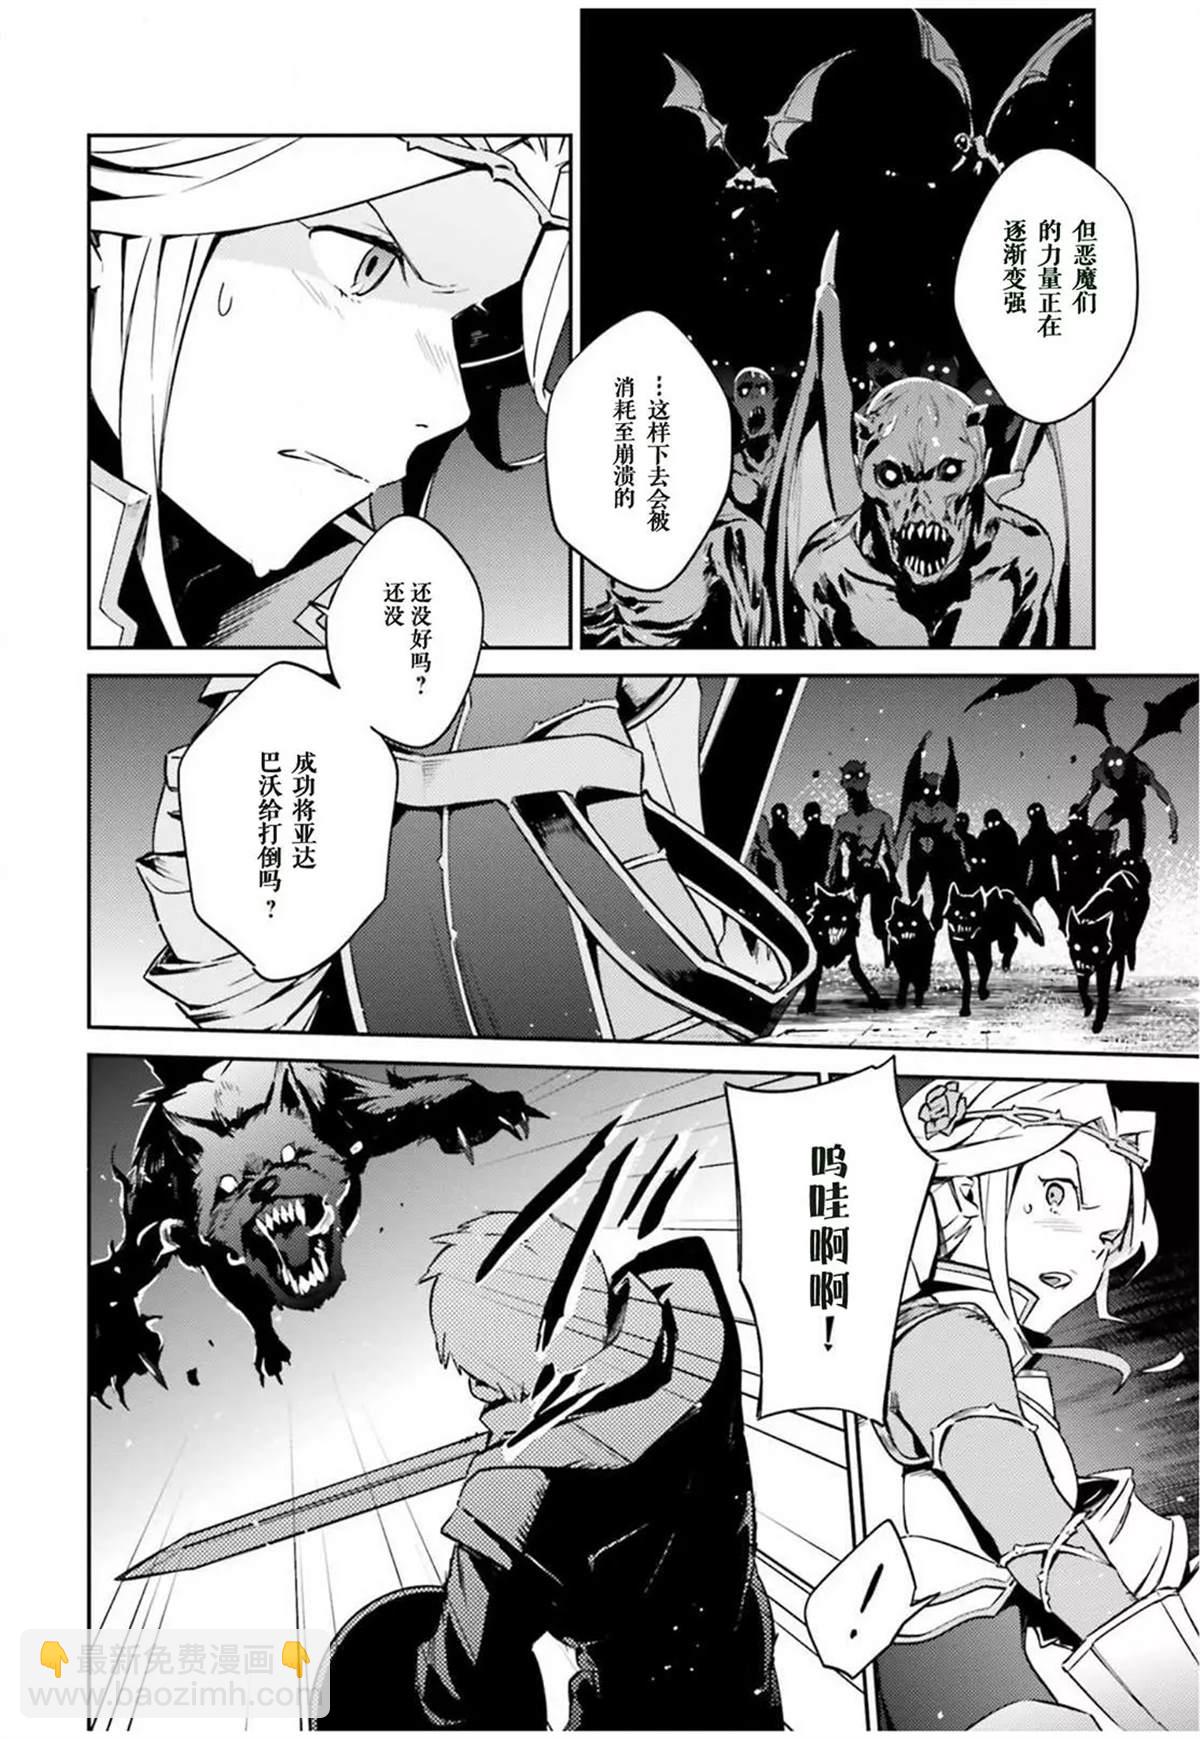 OVERLORD - 第50話 - 1